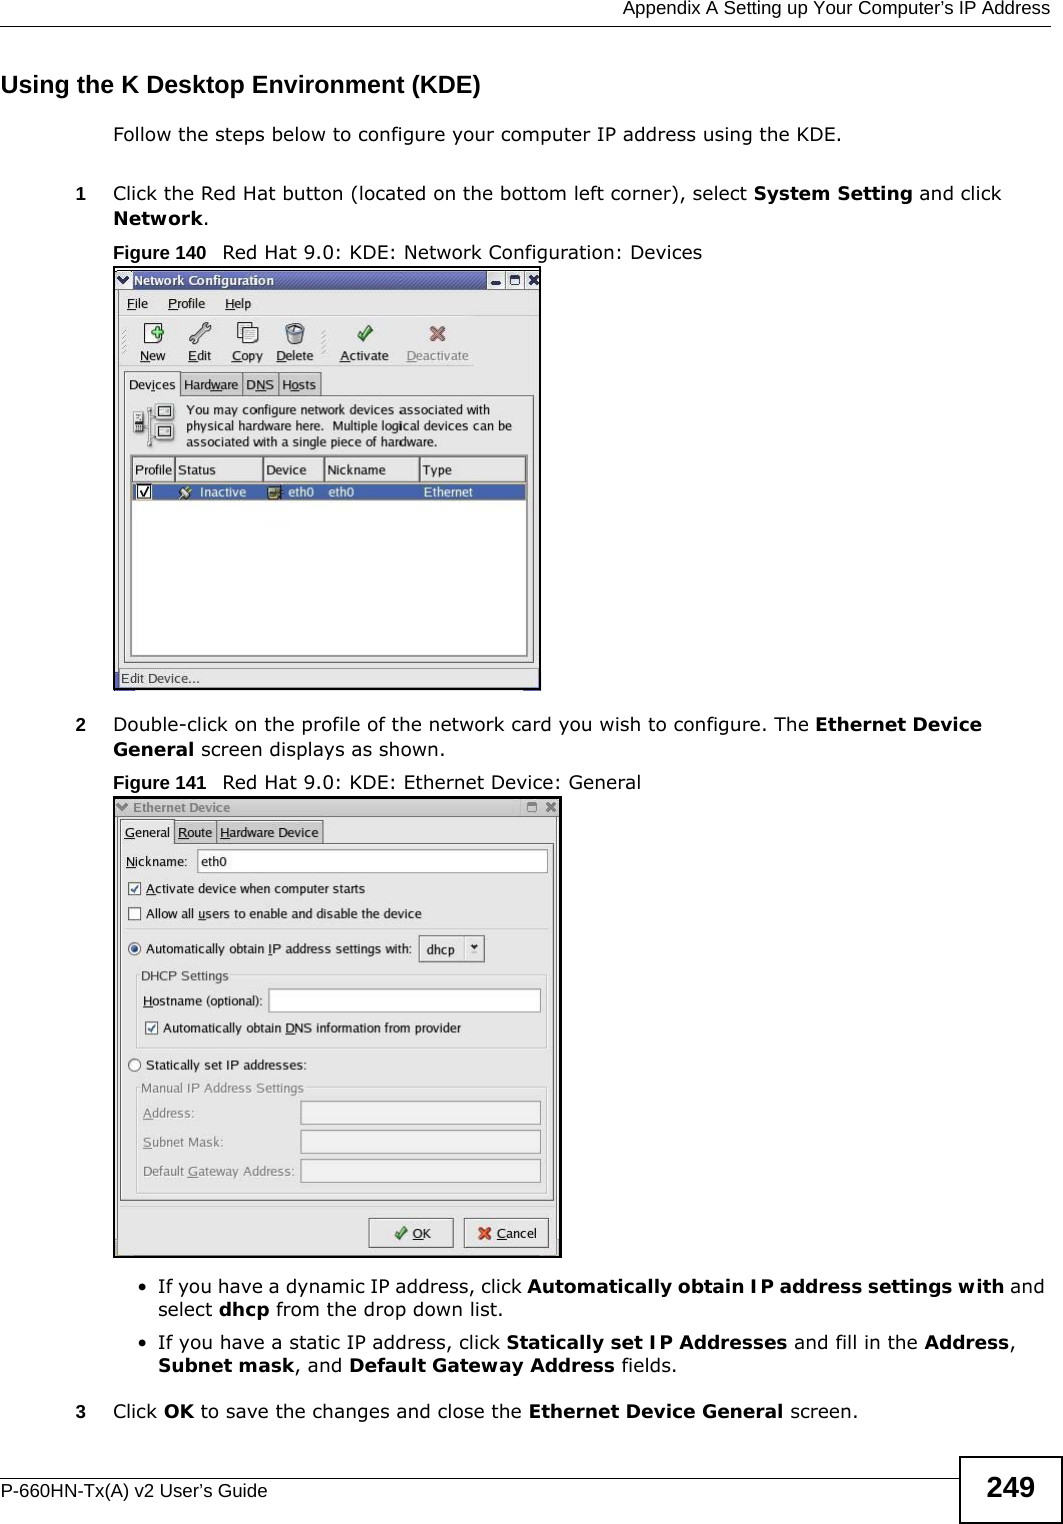  Appendix A Setting up Your Computer’s IP AddressP-660HN-Tx(A) v2 User’s Guide 249Using the K Desktop Environment (KDE)Follow the steps below to configure your computer IP address using the KDE. 1Click the Red Hat button (located on the bottom left corner), select System Setting and click Network.Figure 140   Red Hat 9.0: KDE: Network Configuration: Devices 2Double-click on the profile of the network card you wish to configure. The Ethernet Device General screen displays as shown. Figure 141   Red Hat 9.0: KDE: Ethernet Device: General  • If you have a dynamic IP address, click Automatically obtain IP address settings with and select dhcp from the drop down list. • If you have a static IP address, click Statically set IP Addresses and fill in the Address, Subnet mask, and Default Gateway Address fields. 3Click OK to save the changes and close the Ethernet Device General screen. 